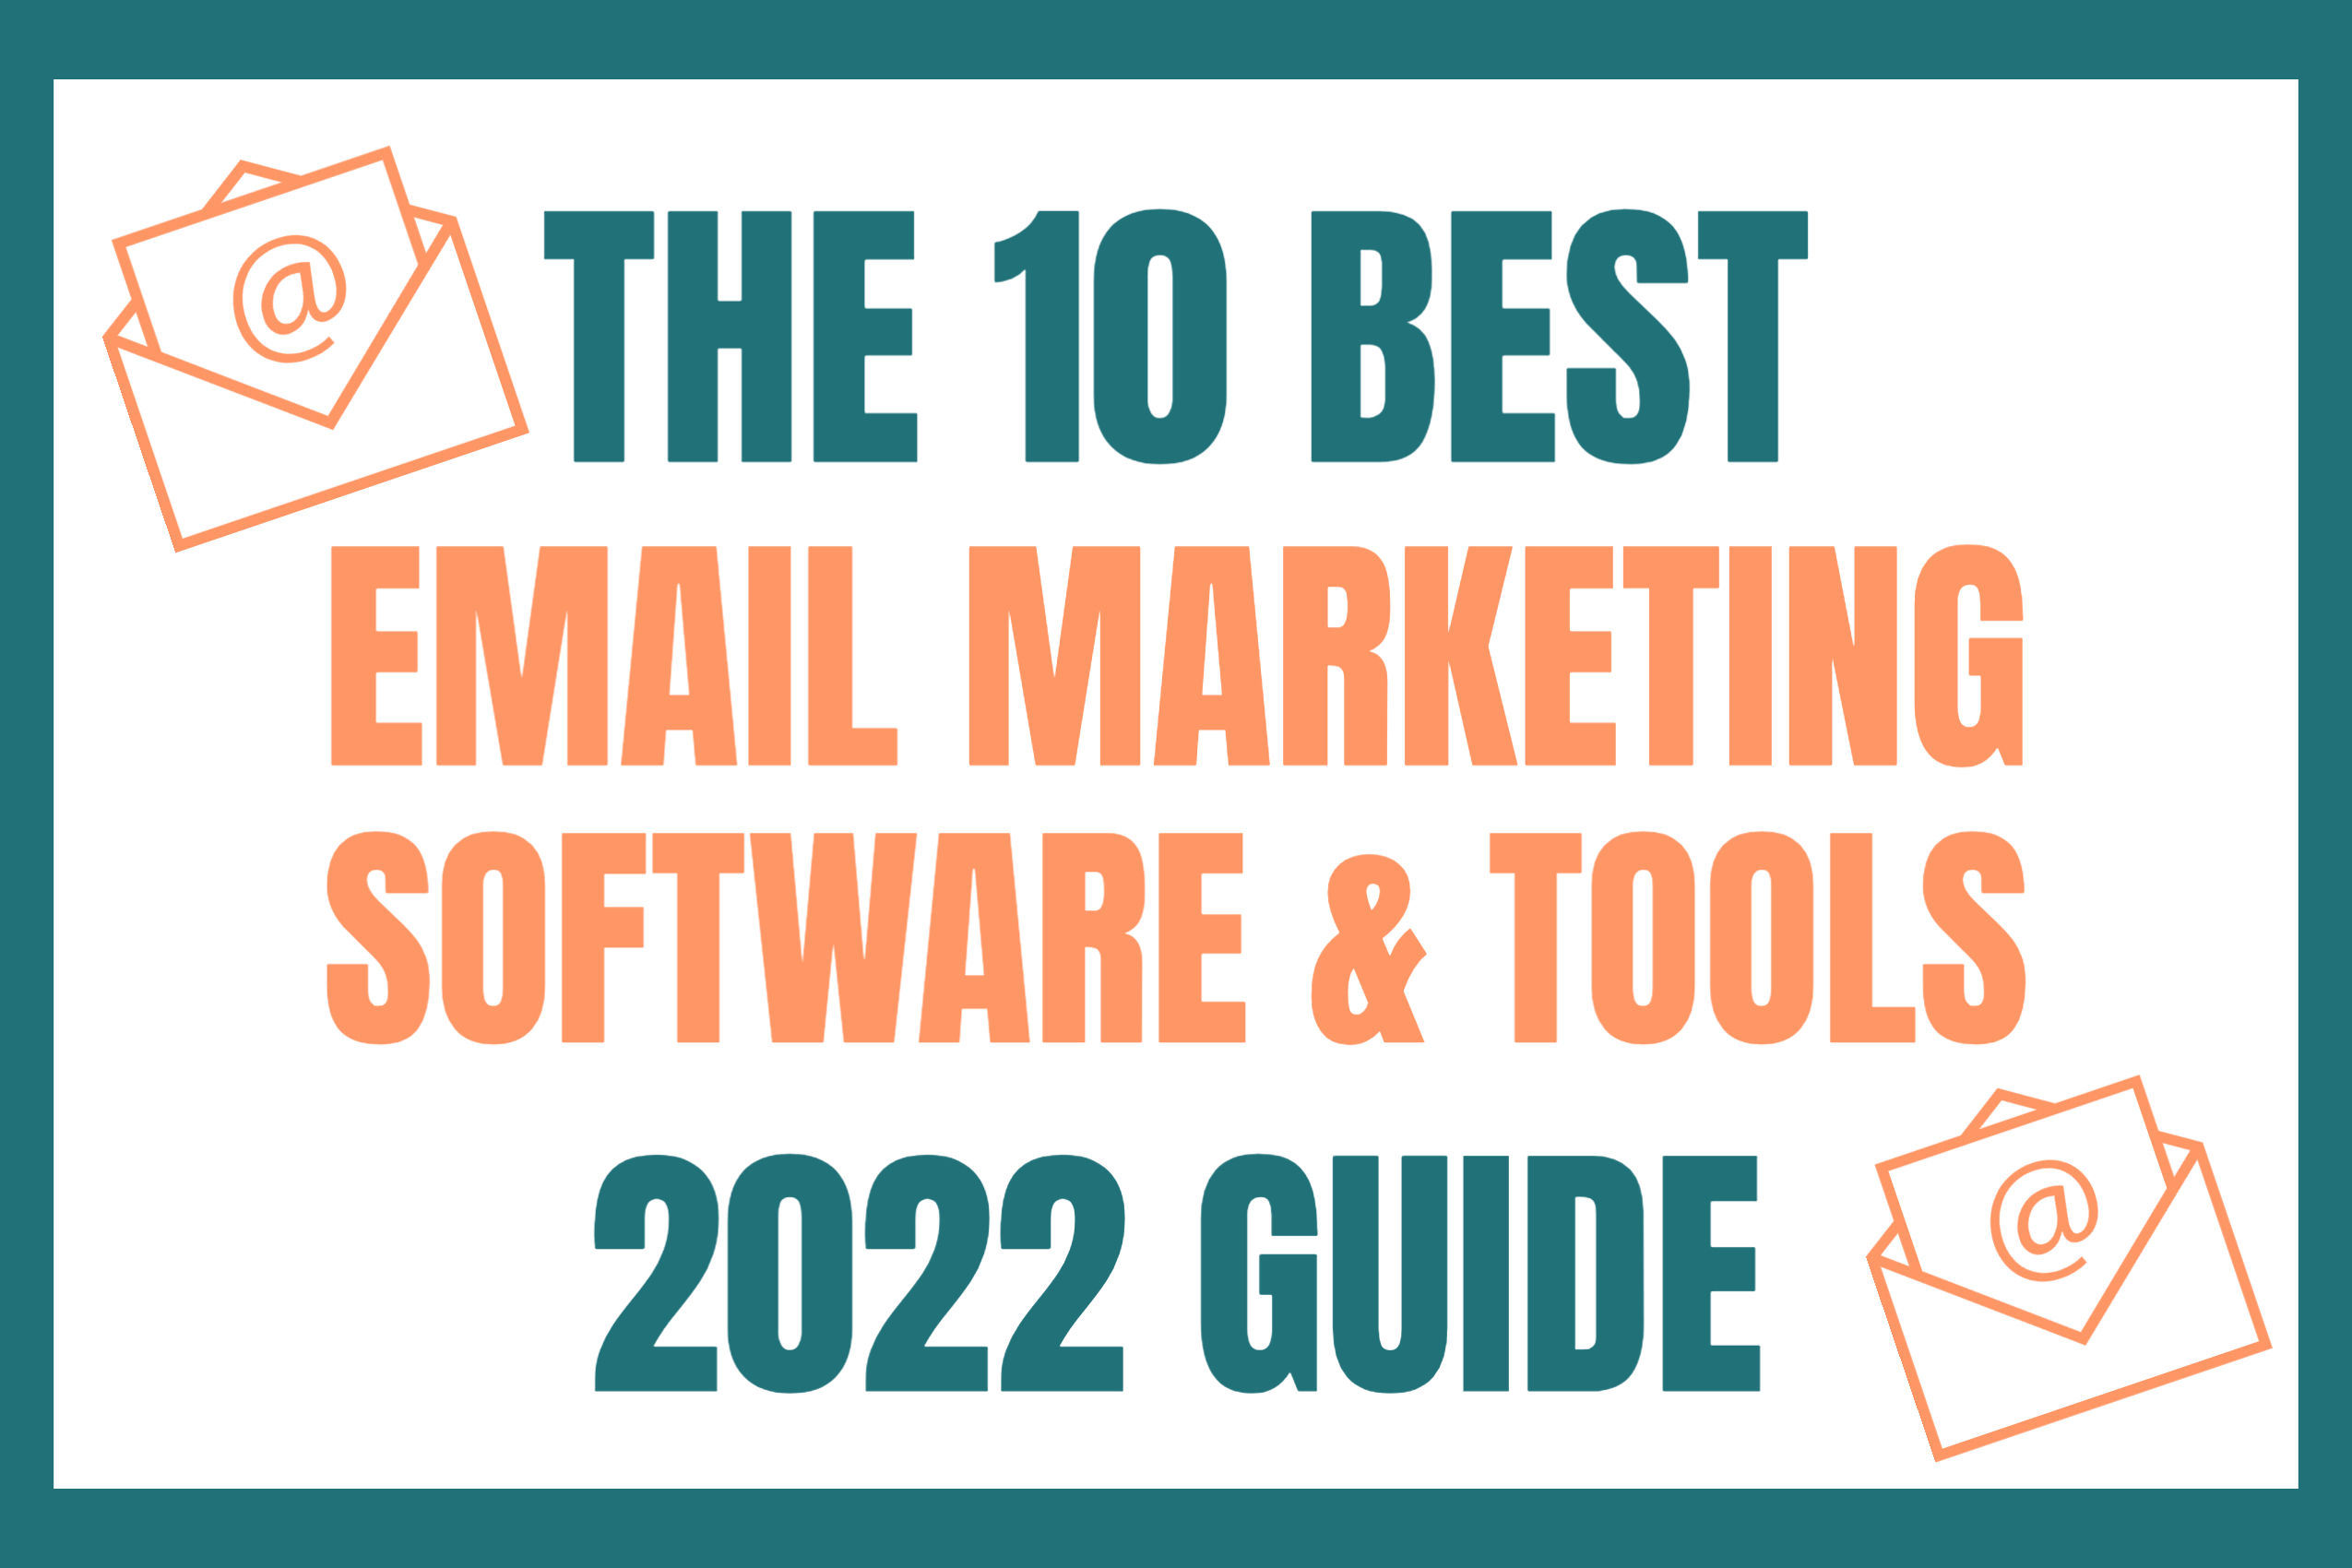 Best email marketing software & tools